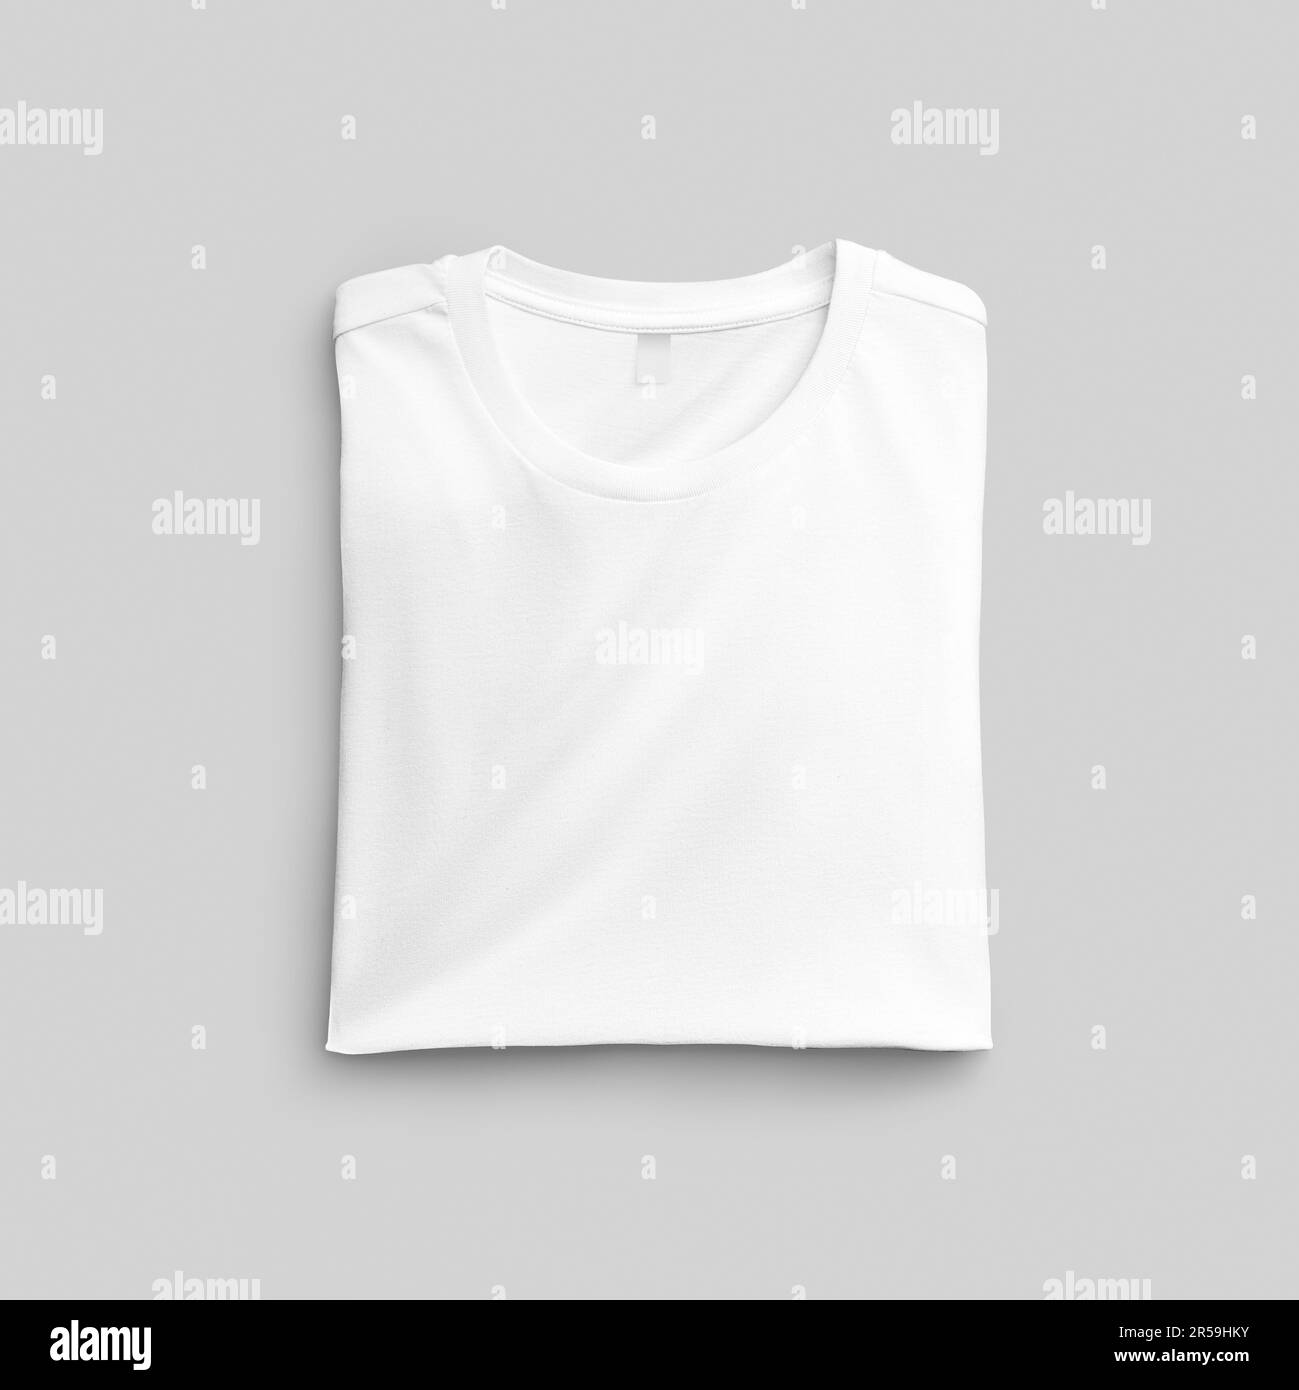 Folded white t-shirt mockup with label, shirt closeup, top view ...